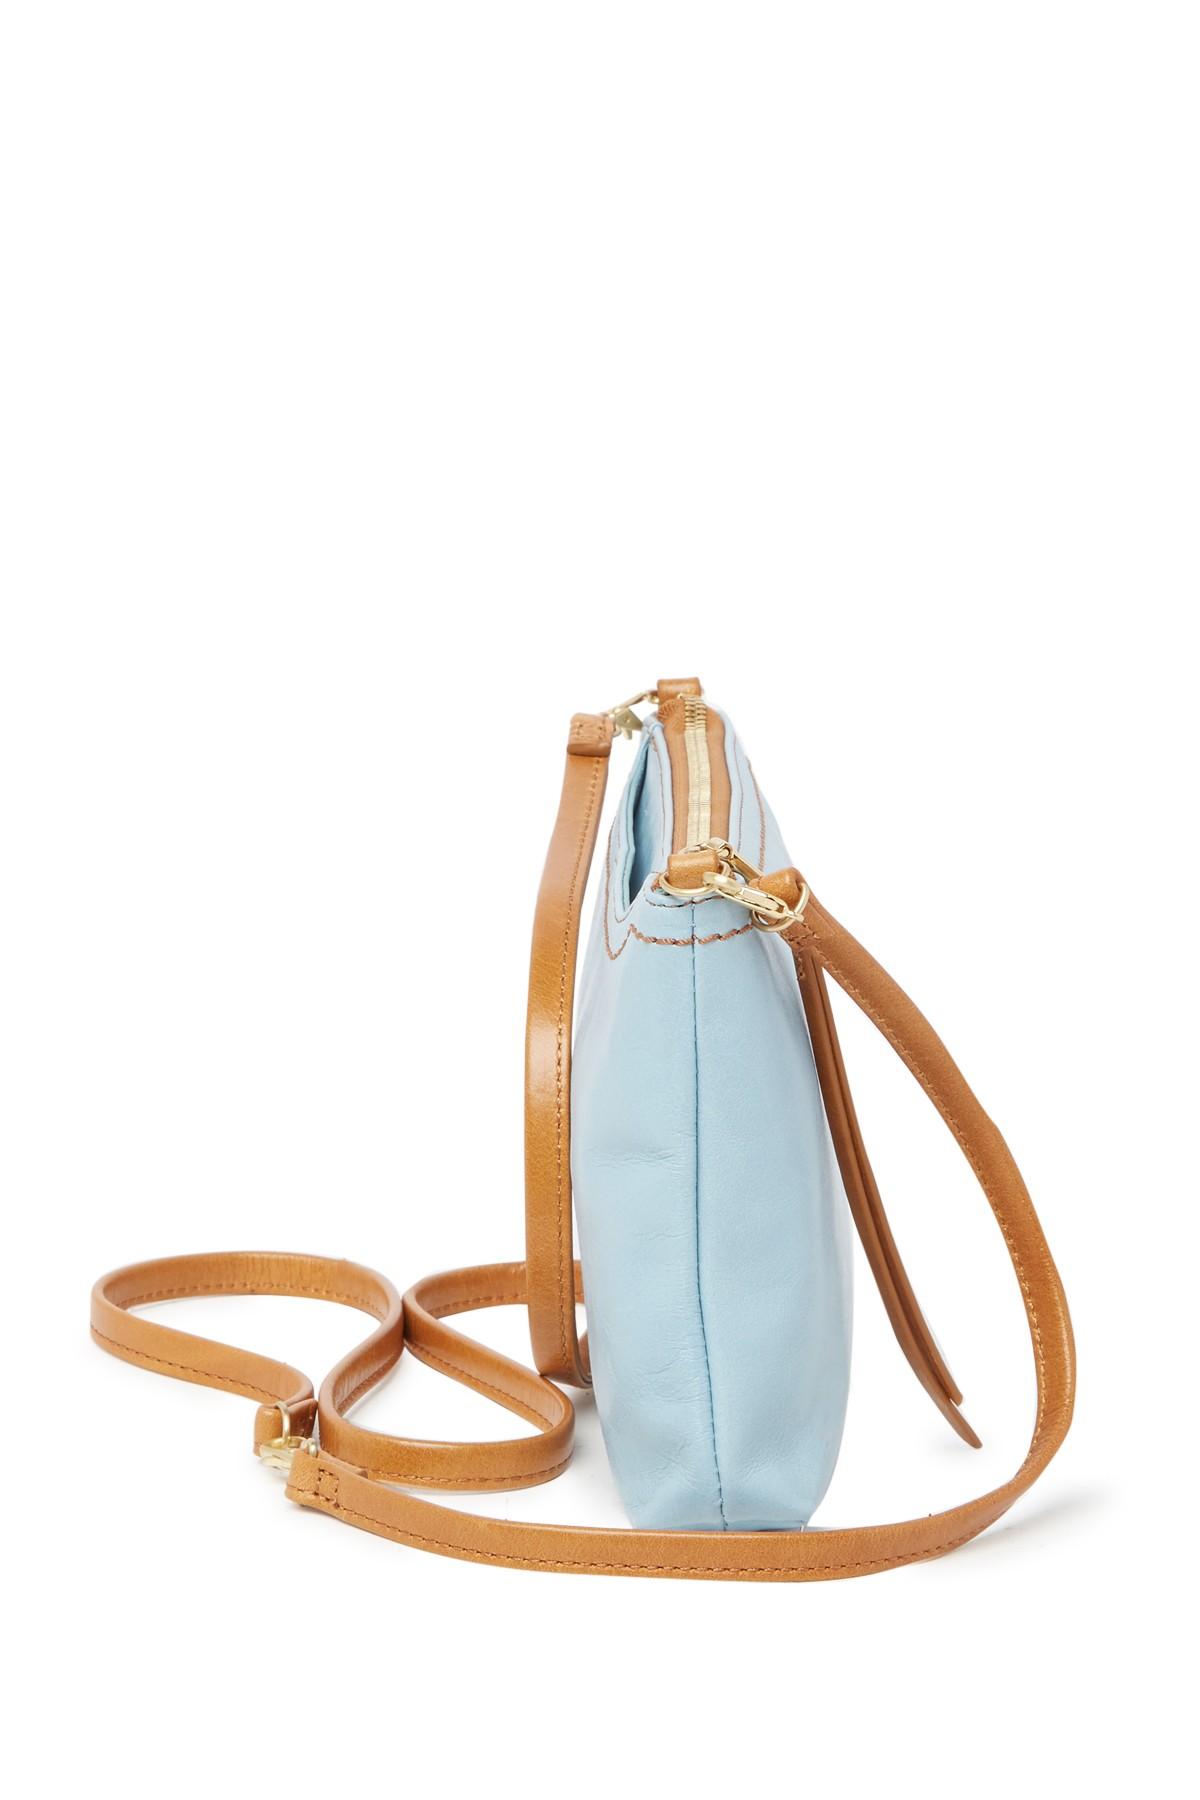 Hobo Darcy Convertible Leather Crossbody Bag in Blue - Lyst